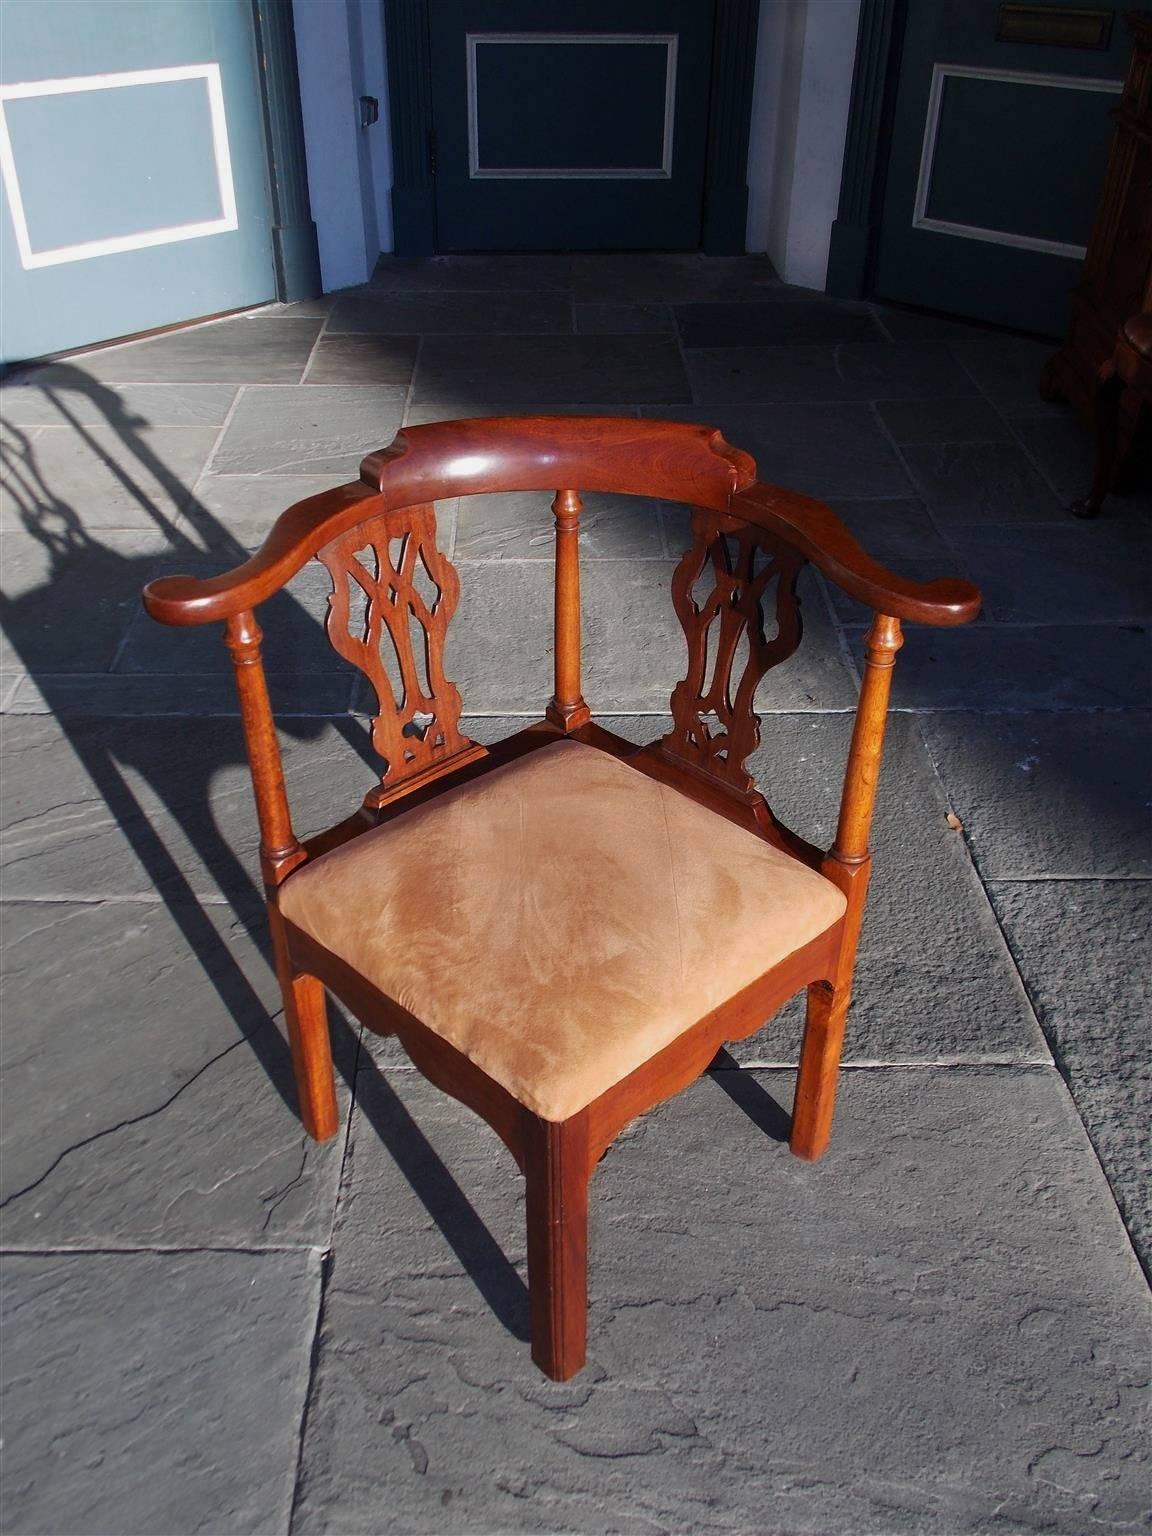 English Chippendale mahogany corner chair with a carved centered back, scrolled outset arms, flanking carved splat backs, a scalloped carved skirt and terminating on molded reeded legs. Retains the original removable seat frame under the upholstery,